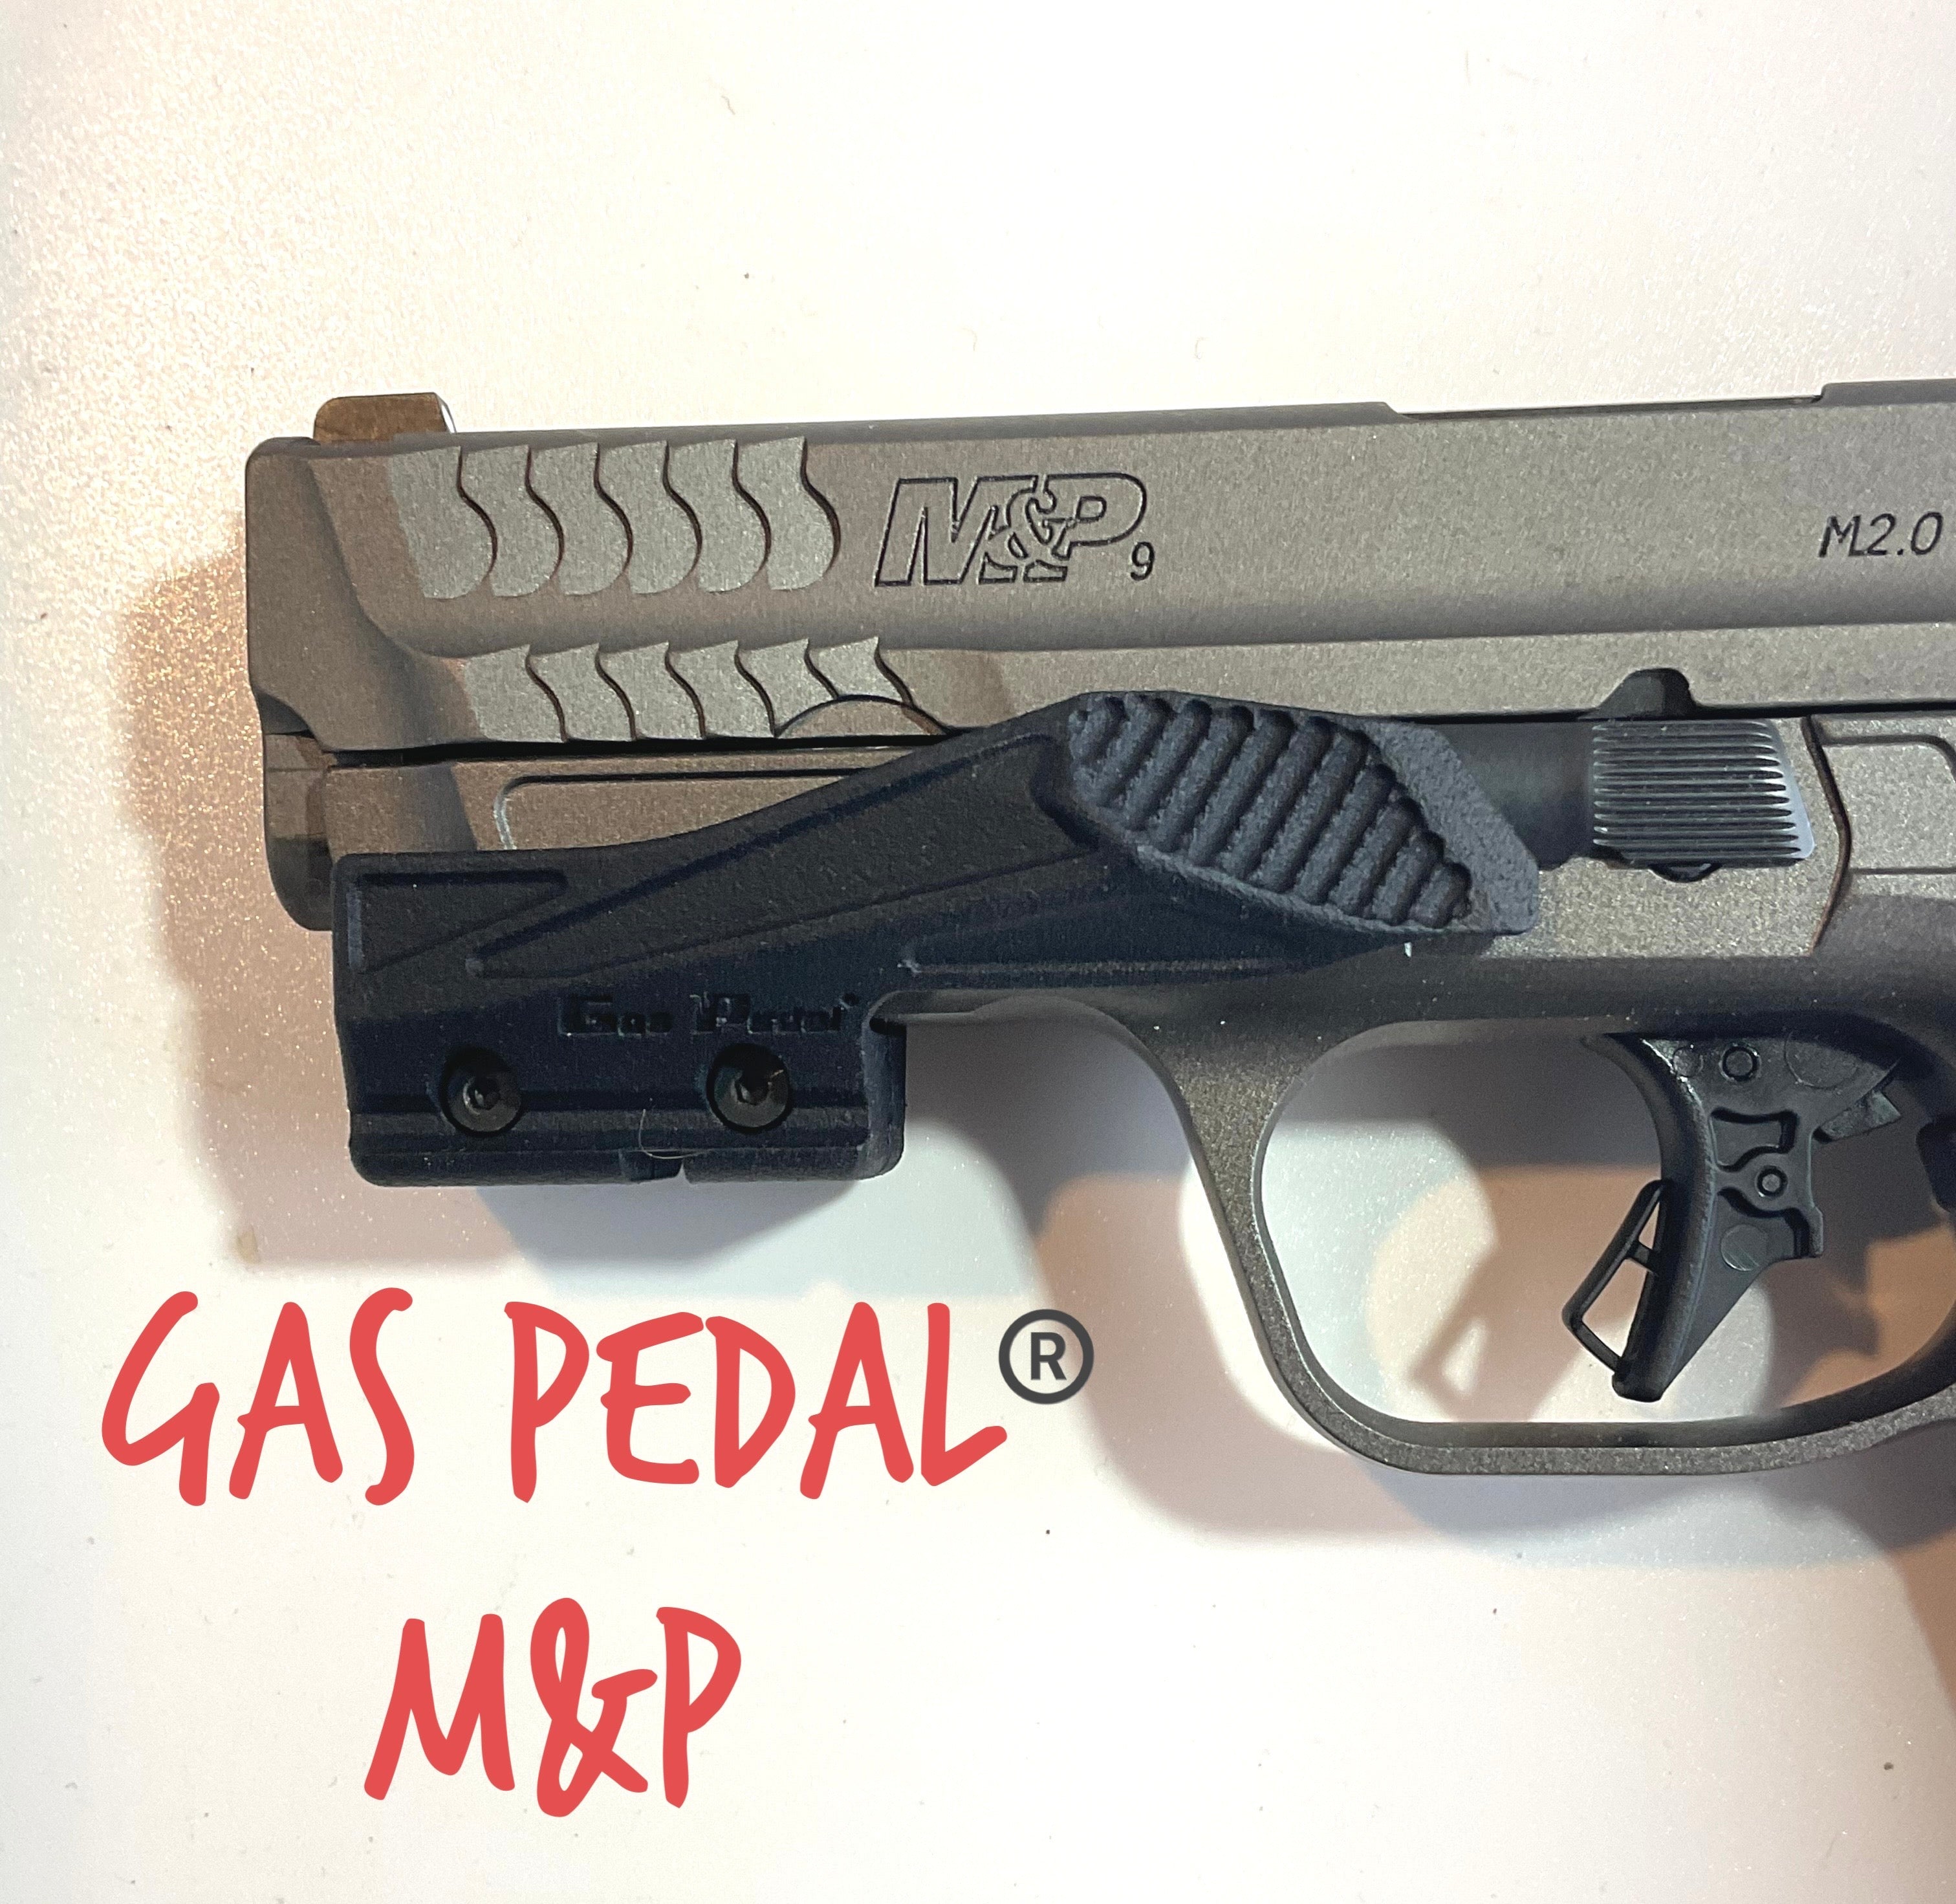 Gas Pedal® on M&P close up